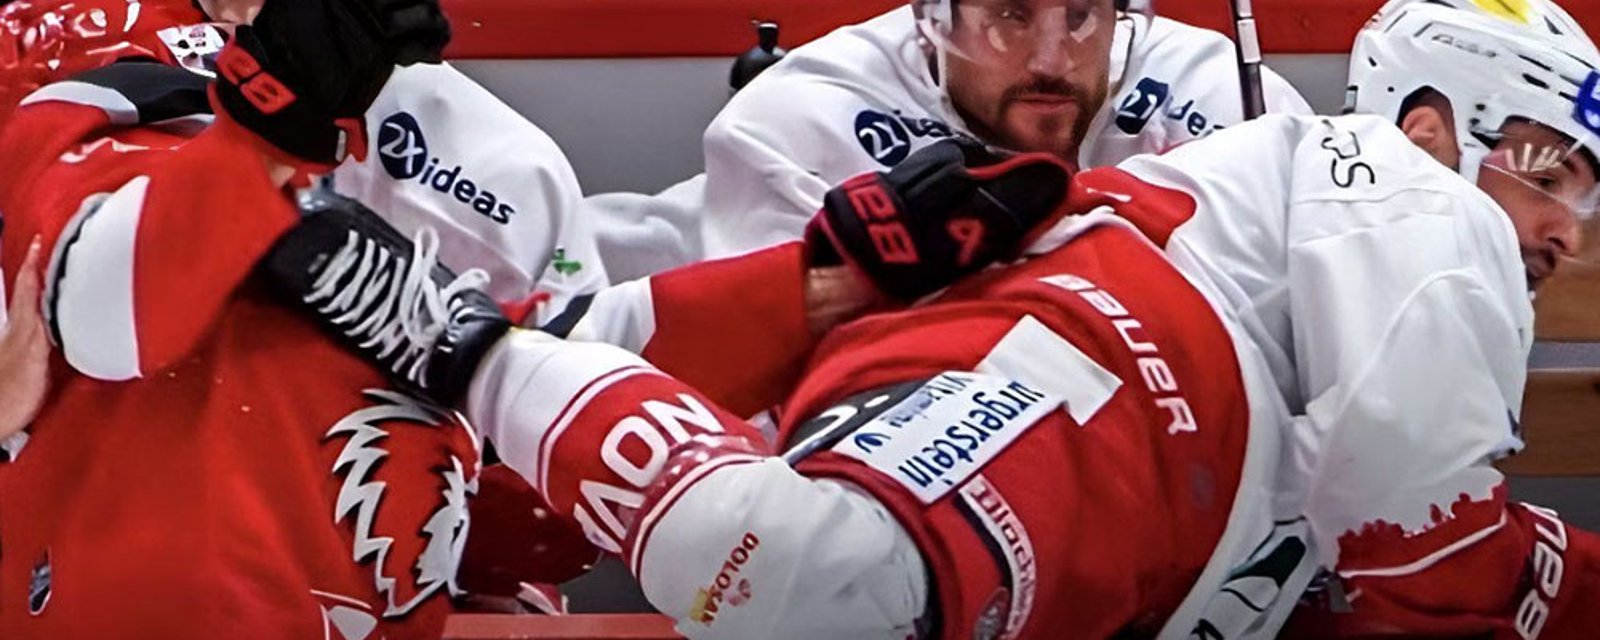 Former NHLer suspended for intentionally kicking an opponent in the neck